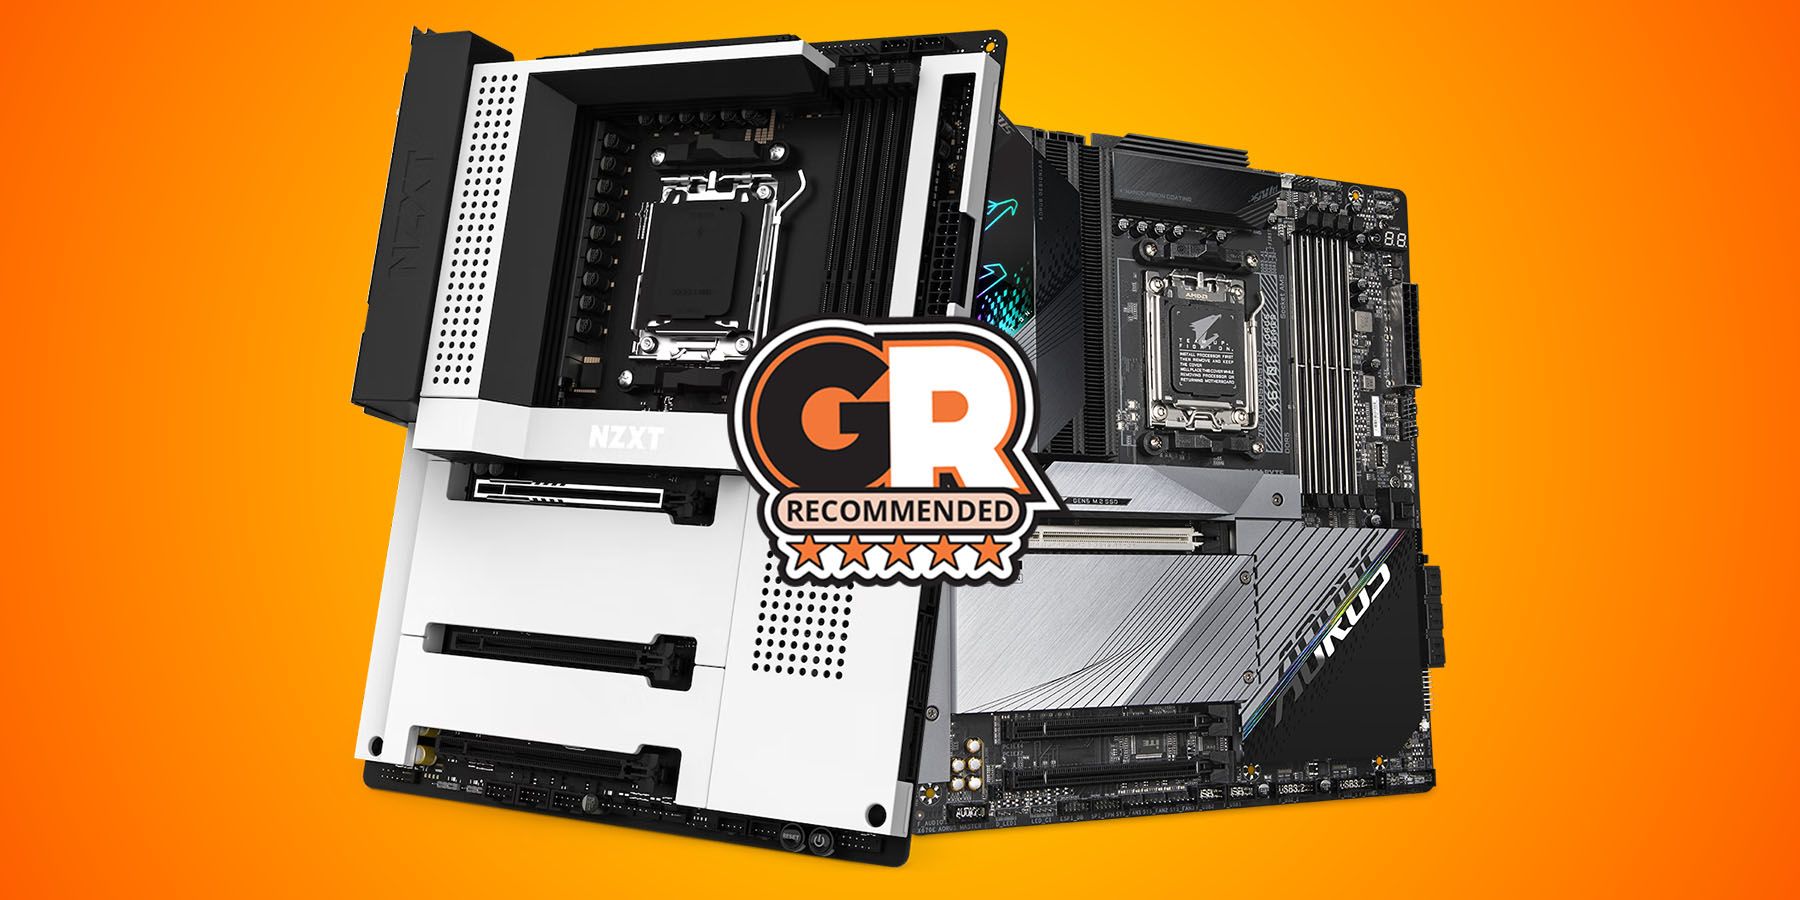 AMD Ryzen 7 7800X3D For Gaming: Which Motherboards To Buy? nzxt n7 asus aorus master Thumb